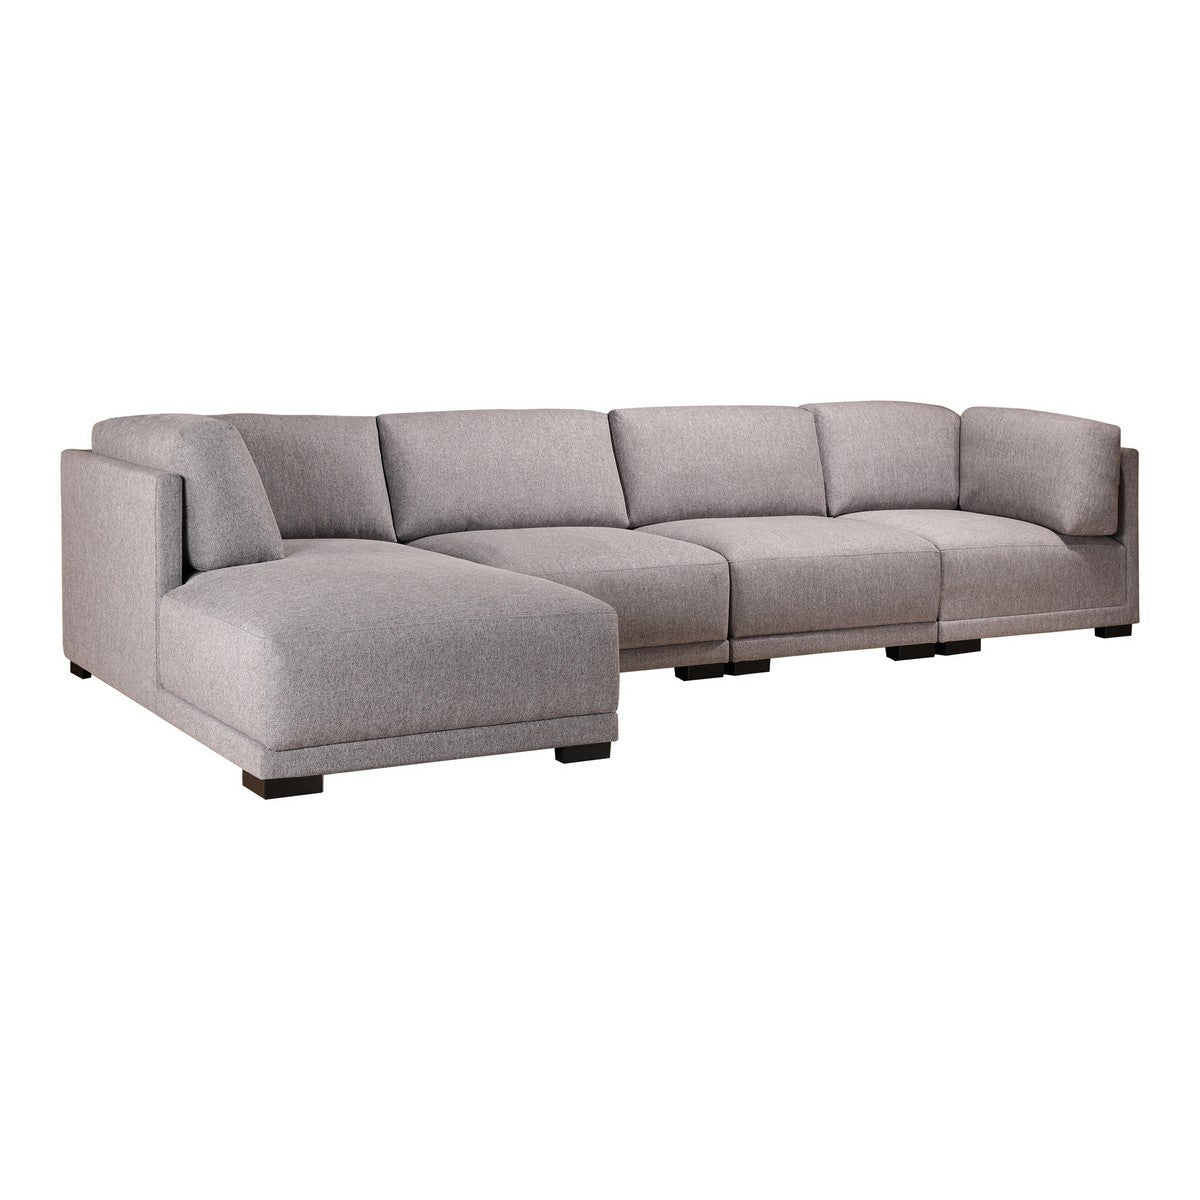 Moe's Home Collection Romeo Modular Sectional Left Grey - RN-1119-29